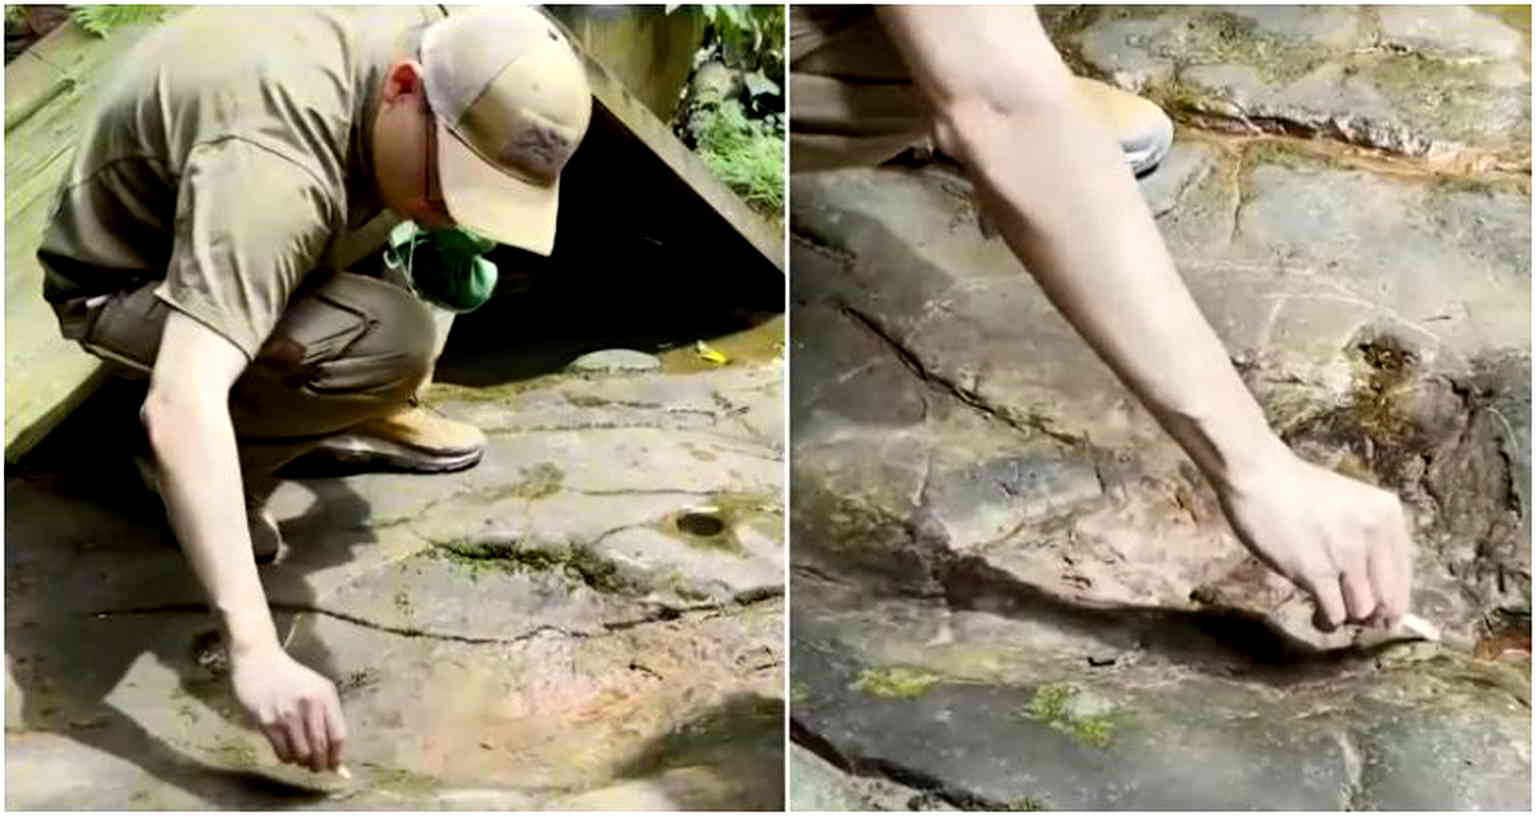 100-million-year-old dinosaur footprints discovered at restaurant in China